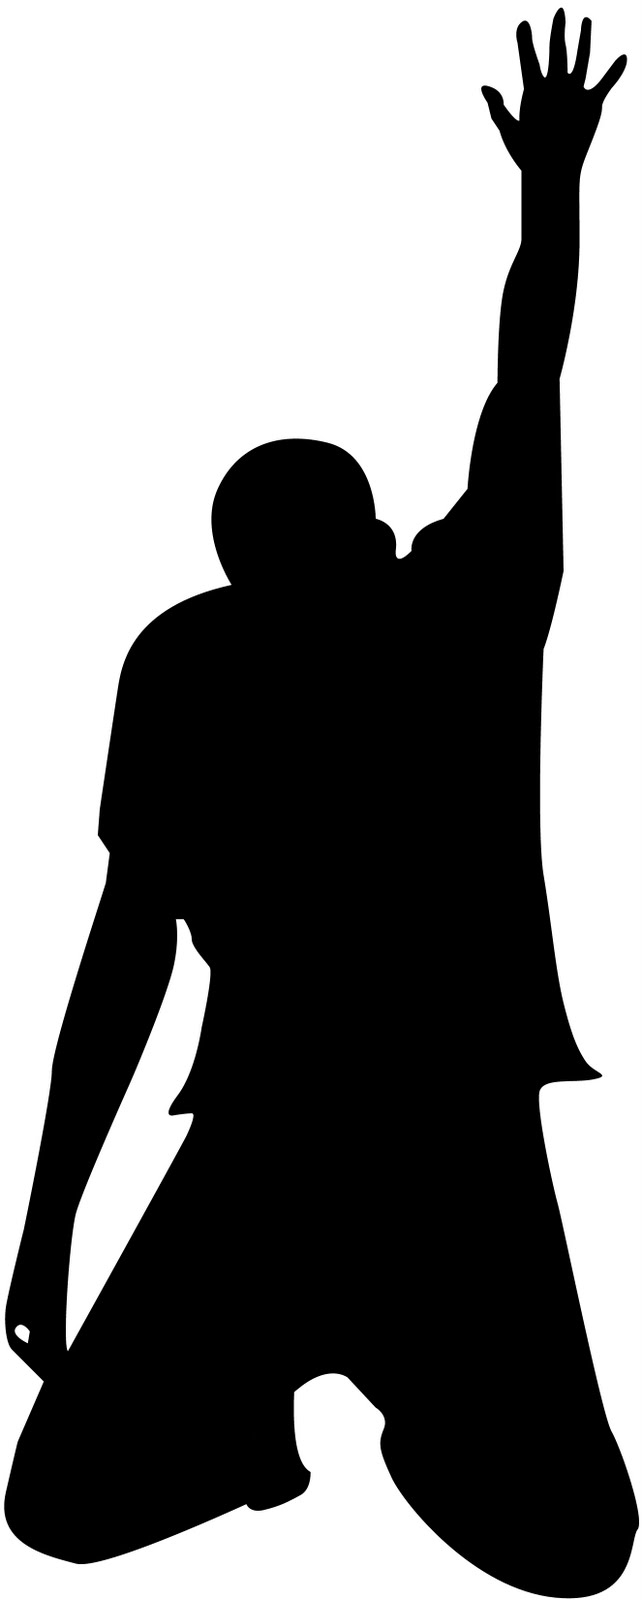 A person kneeling silhouette clipart